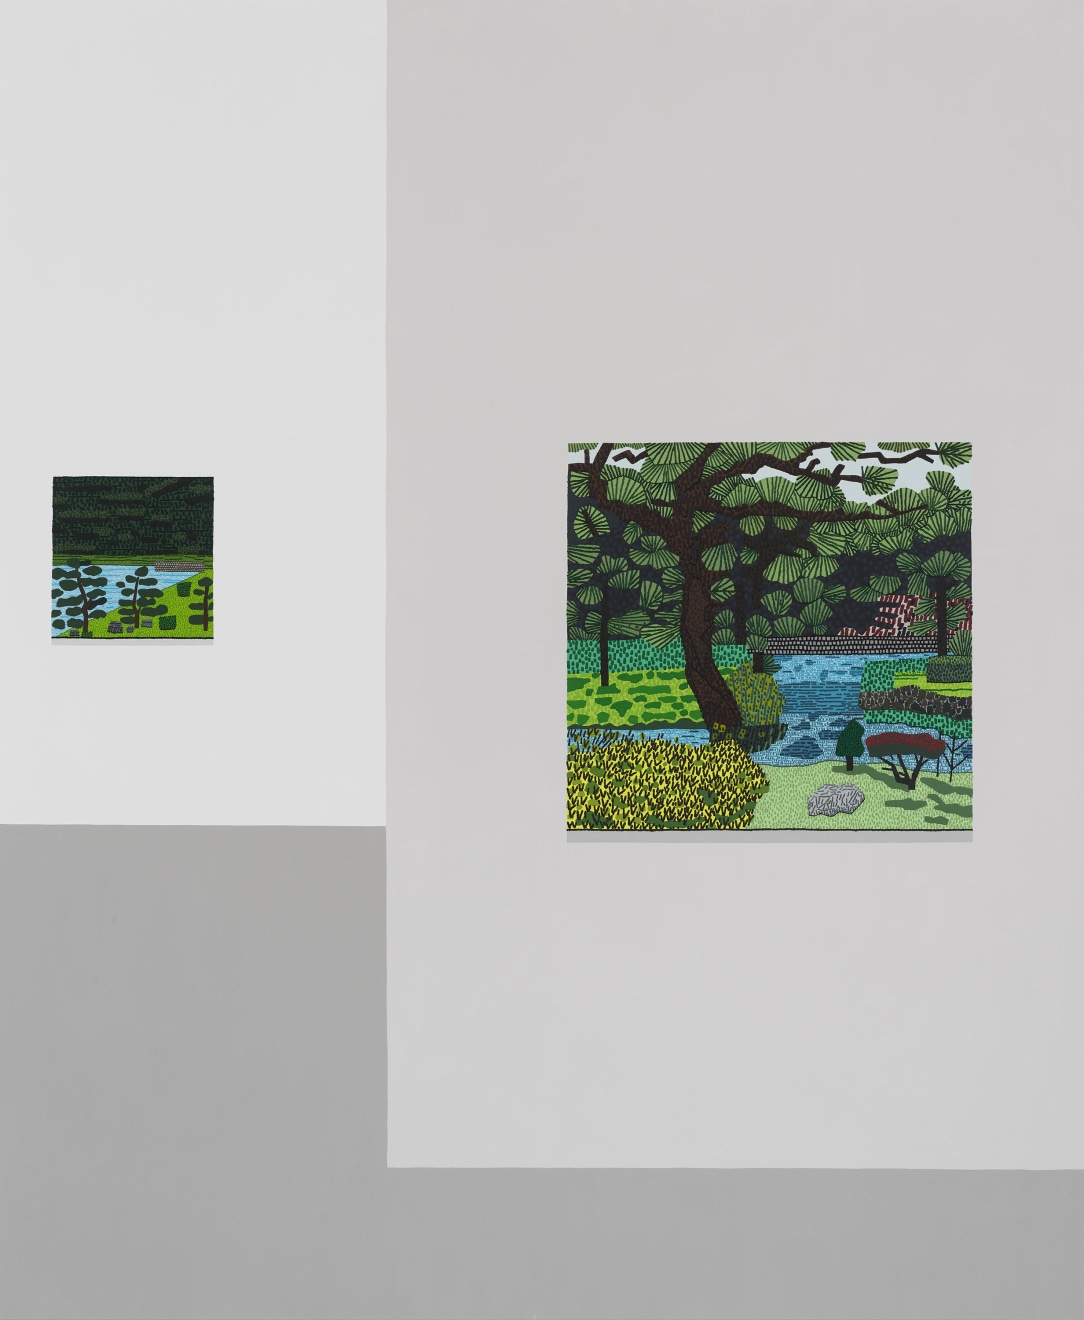 Jonas Wood, Interior with Japanese Landscapes, 2022